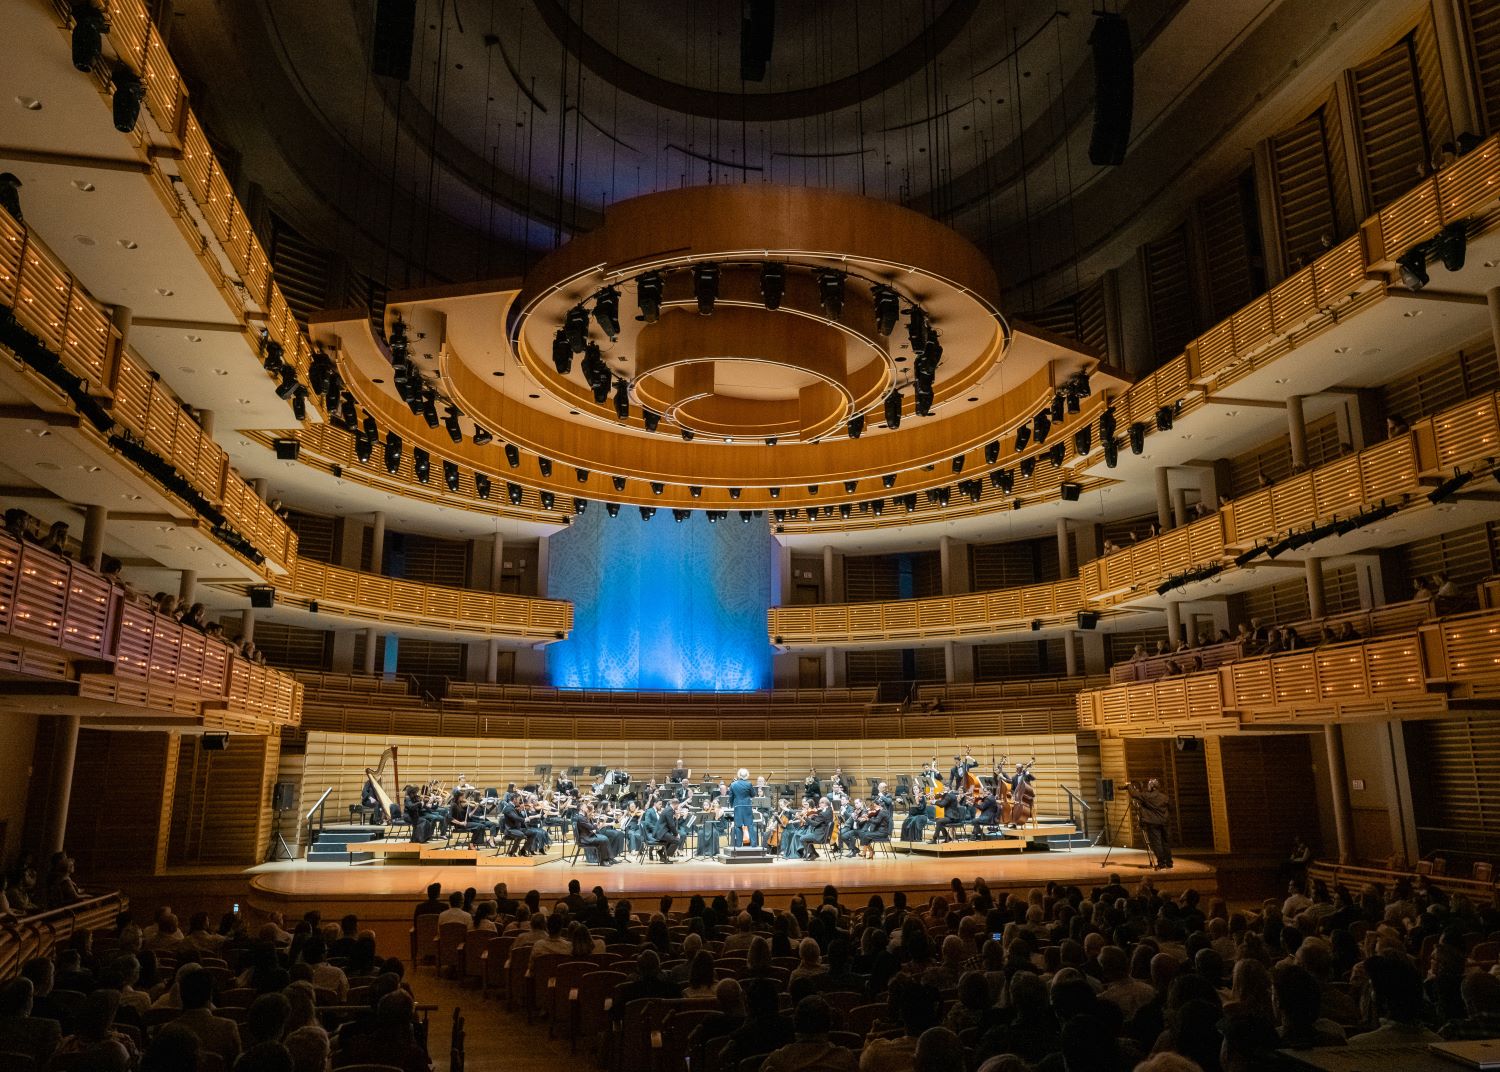 The Miami Symphony Orchestra Grand Season Finale in the Knight Concert Hall. Credit: William Benshimol